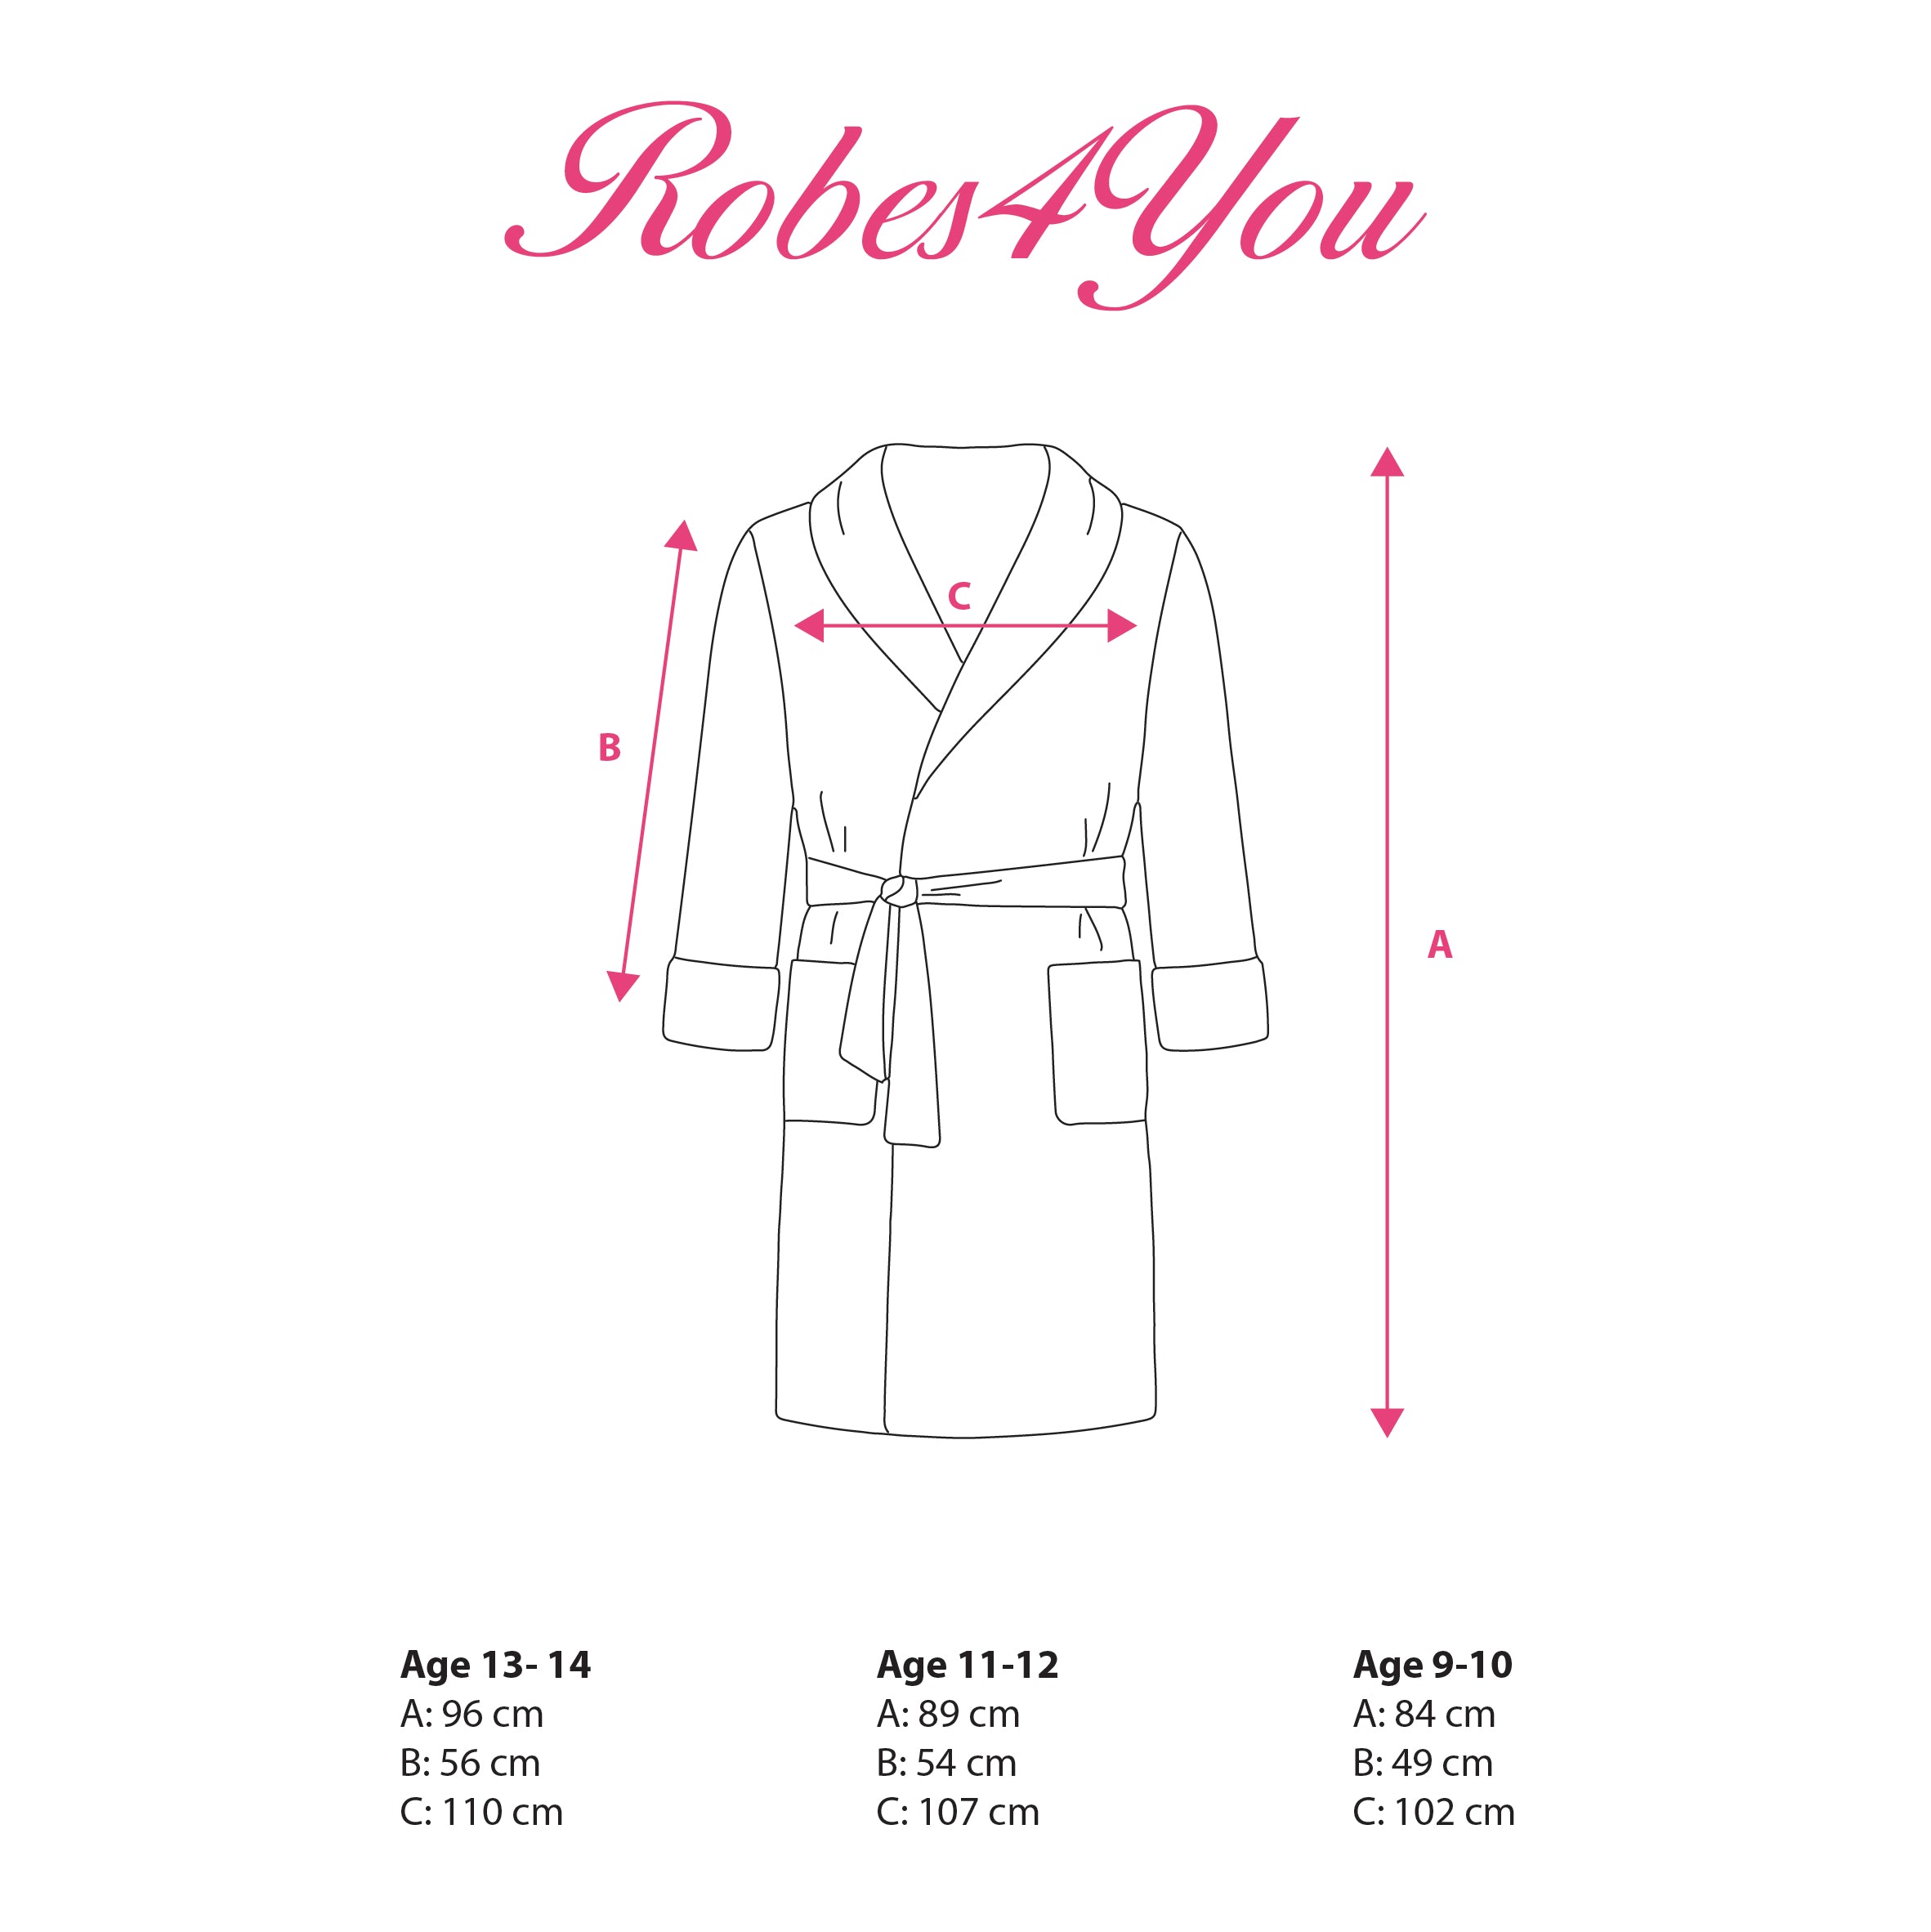 Teenager robe sizing-Robes4you